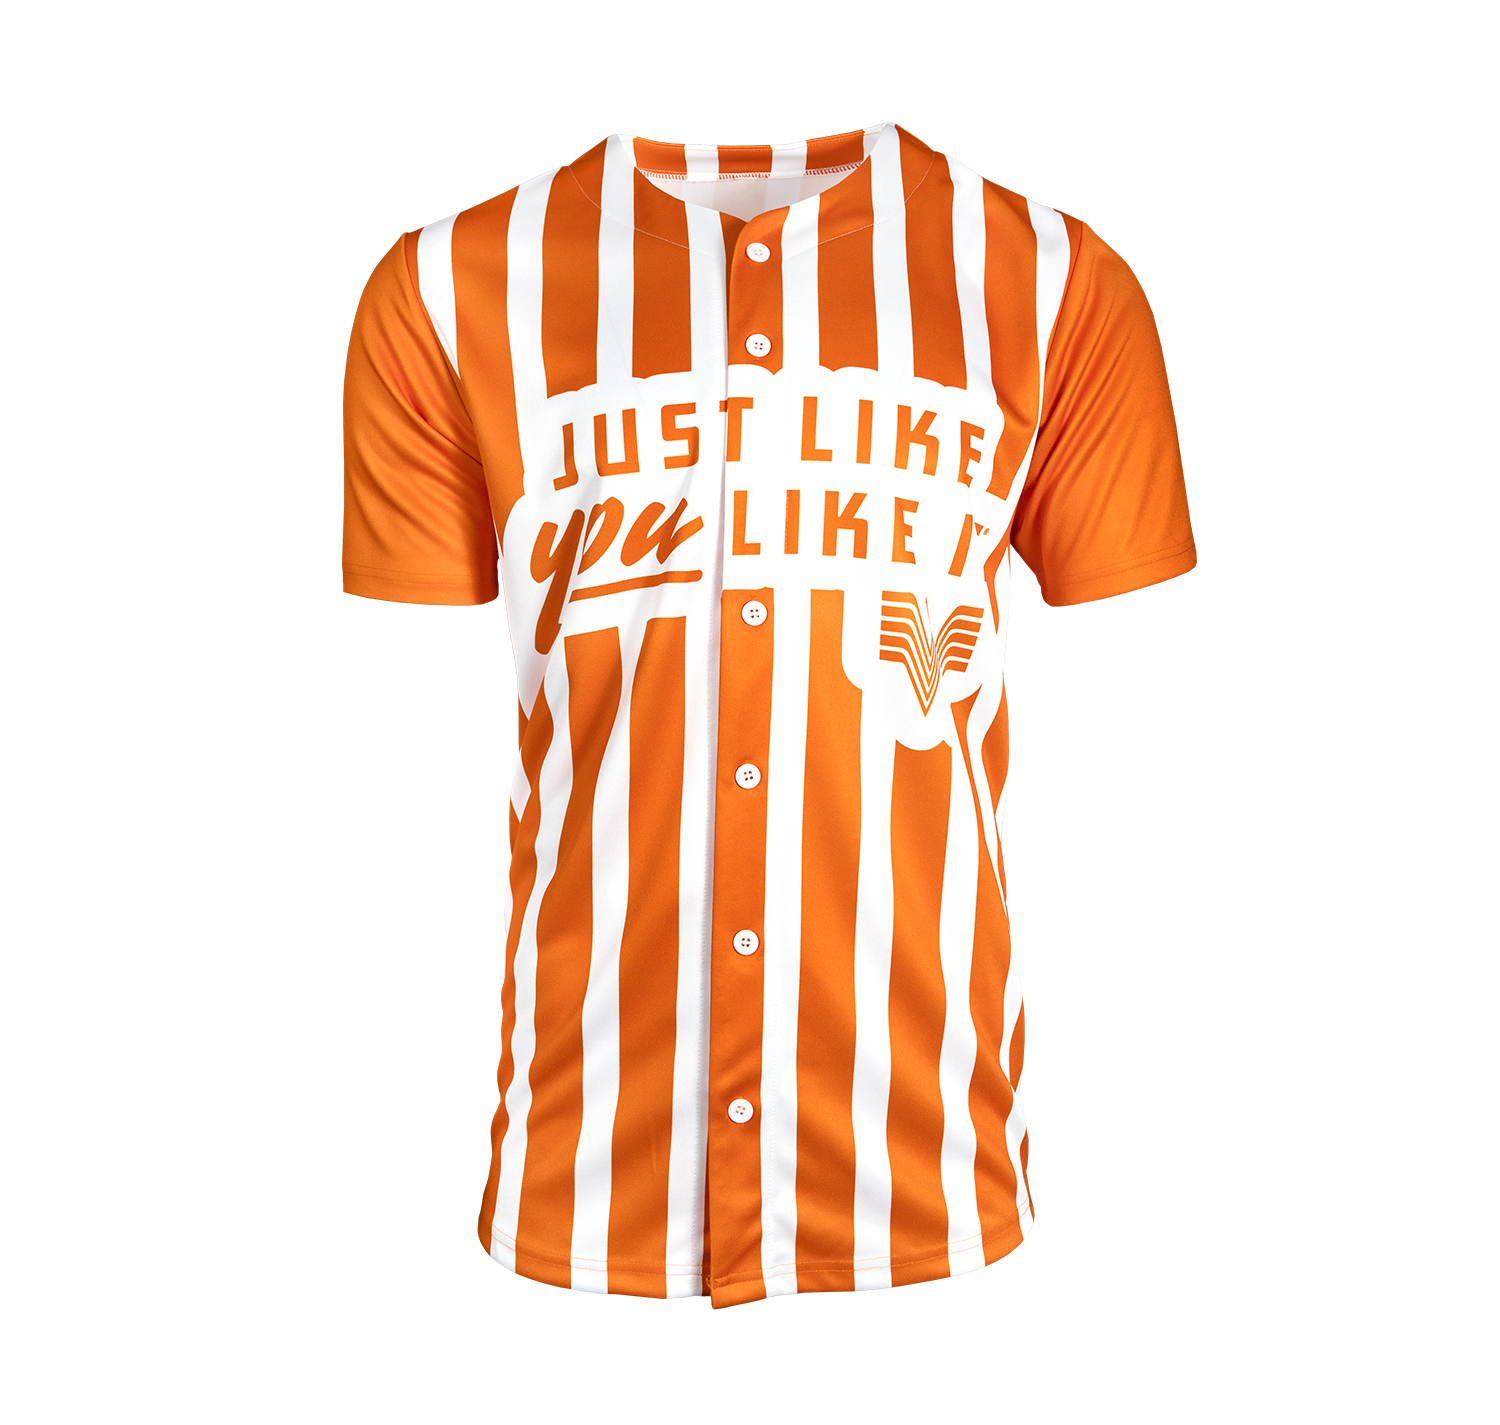 Whatastore' has perfect gifts for Whataburger fans